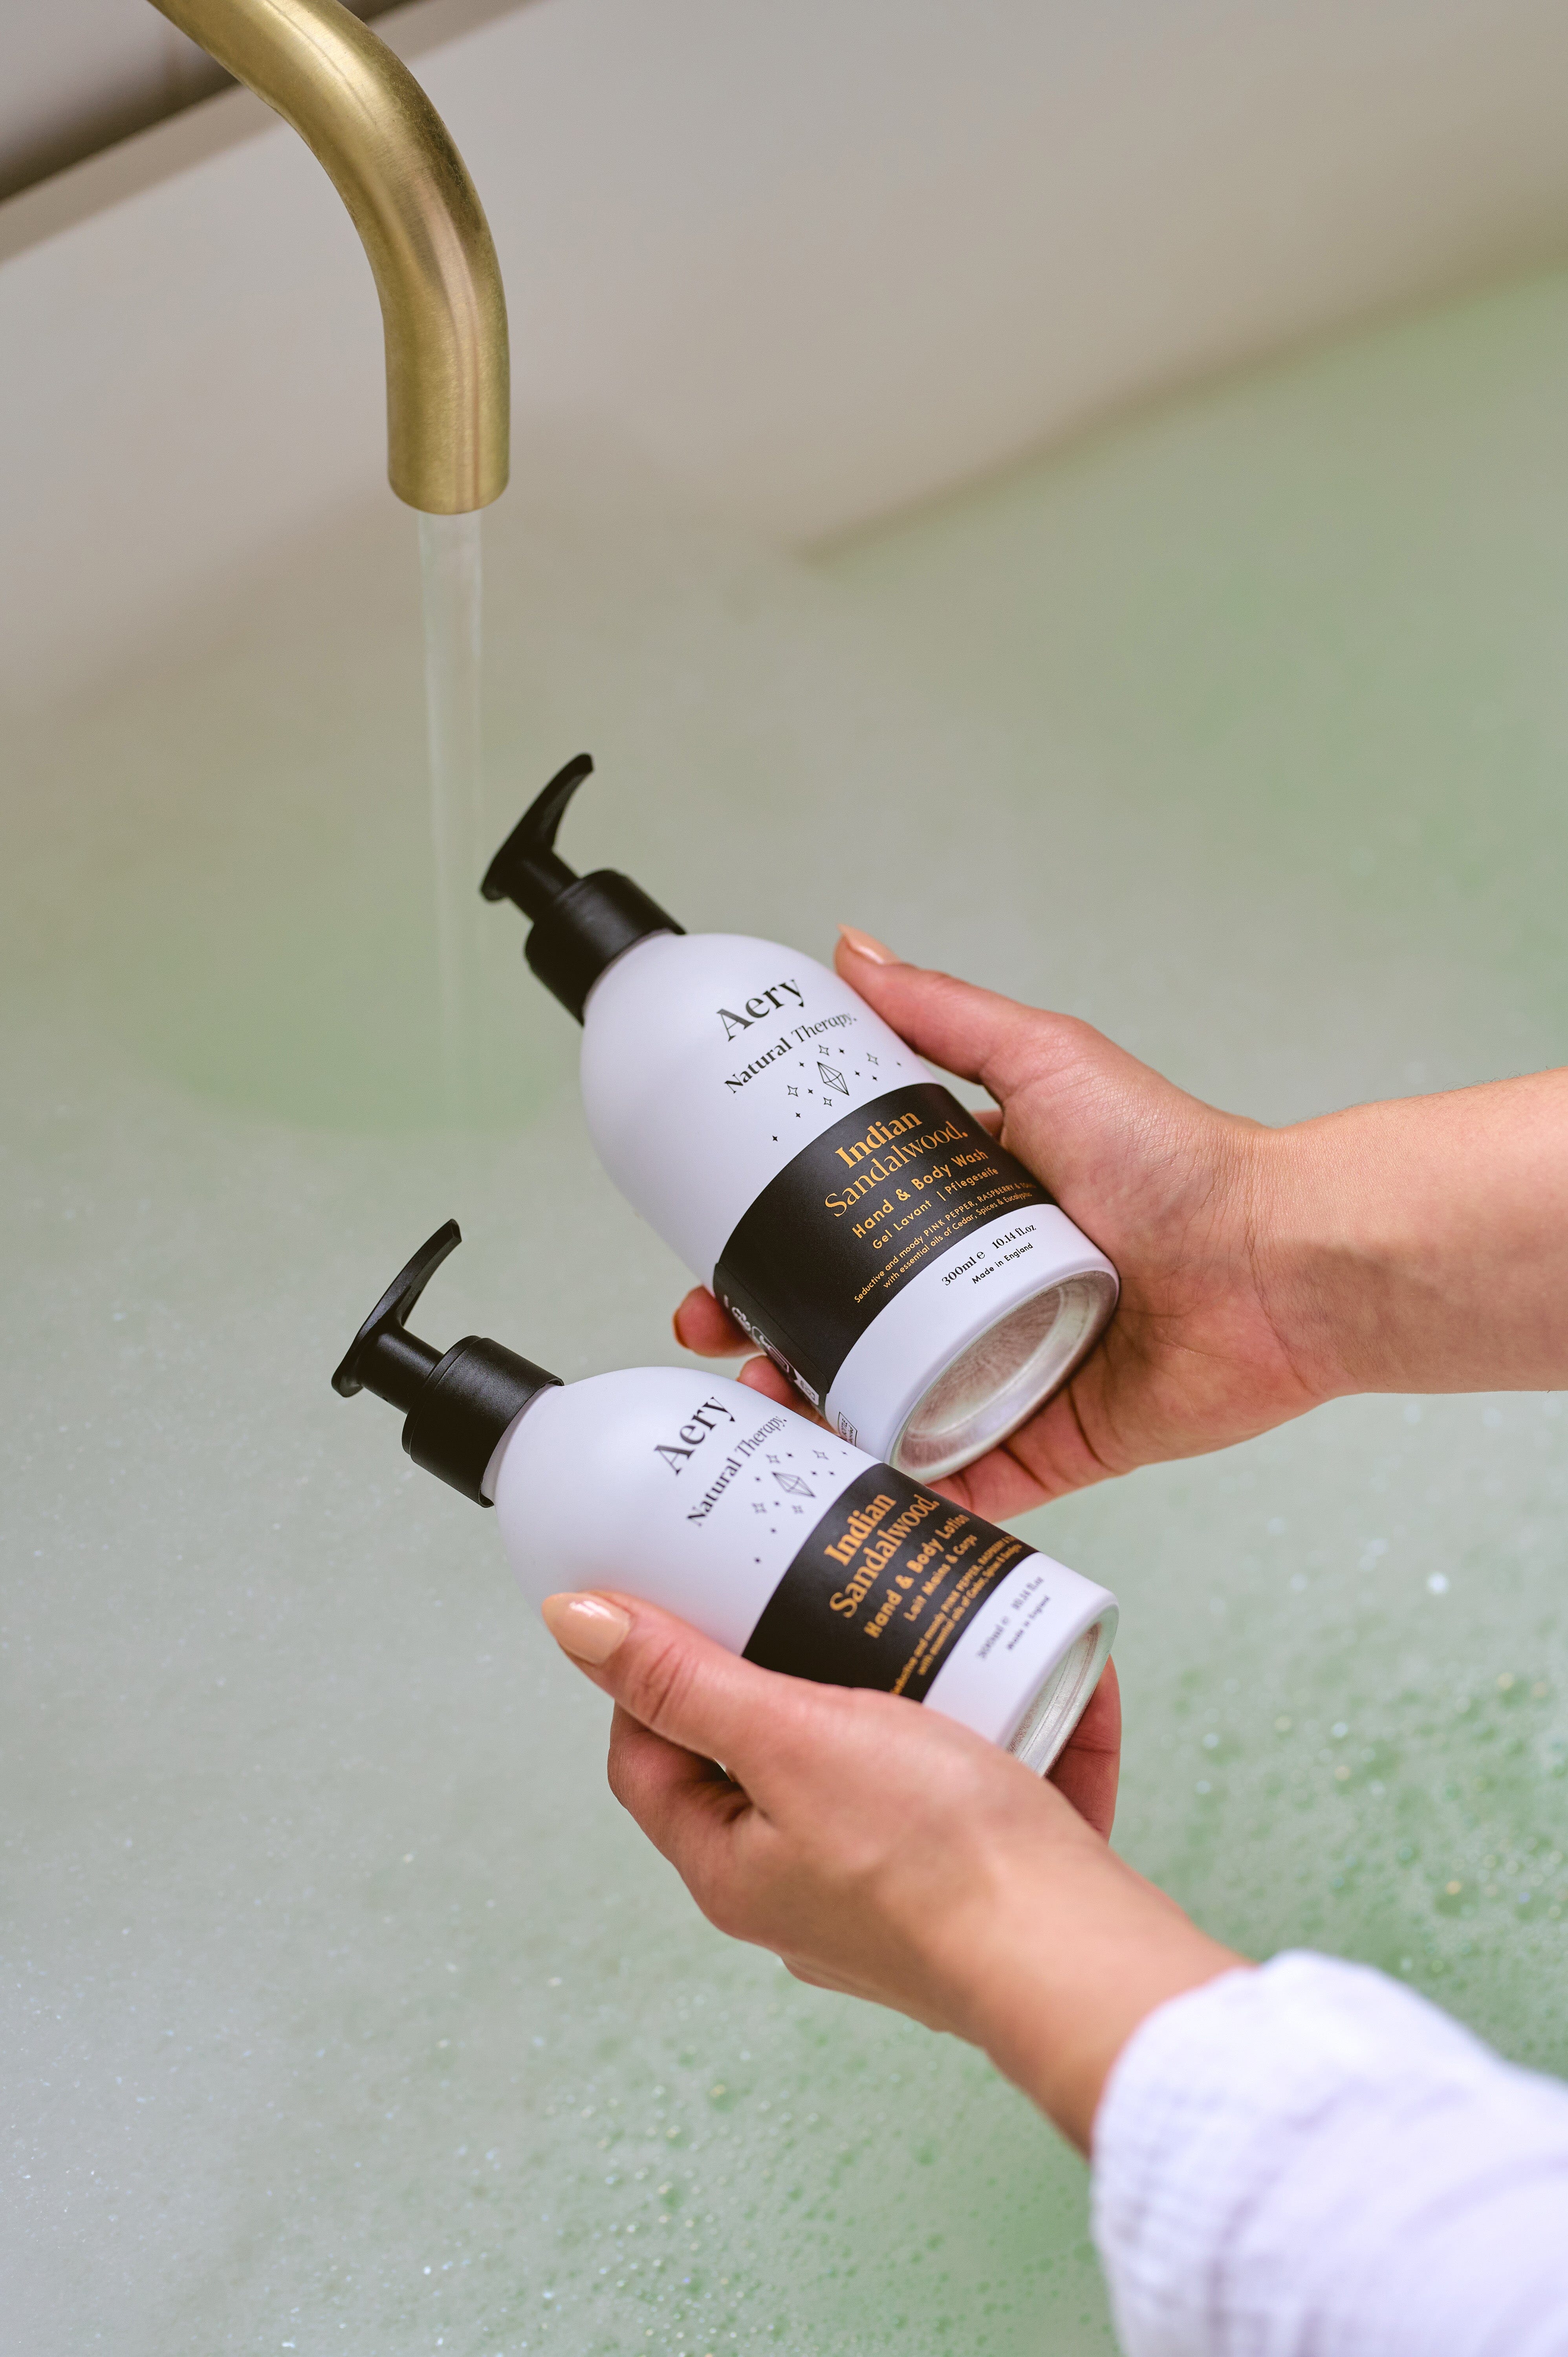 Black Indian Sandalwood hand and body wash and lotion duo by Aery displayed in hands over bubble bath 